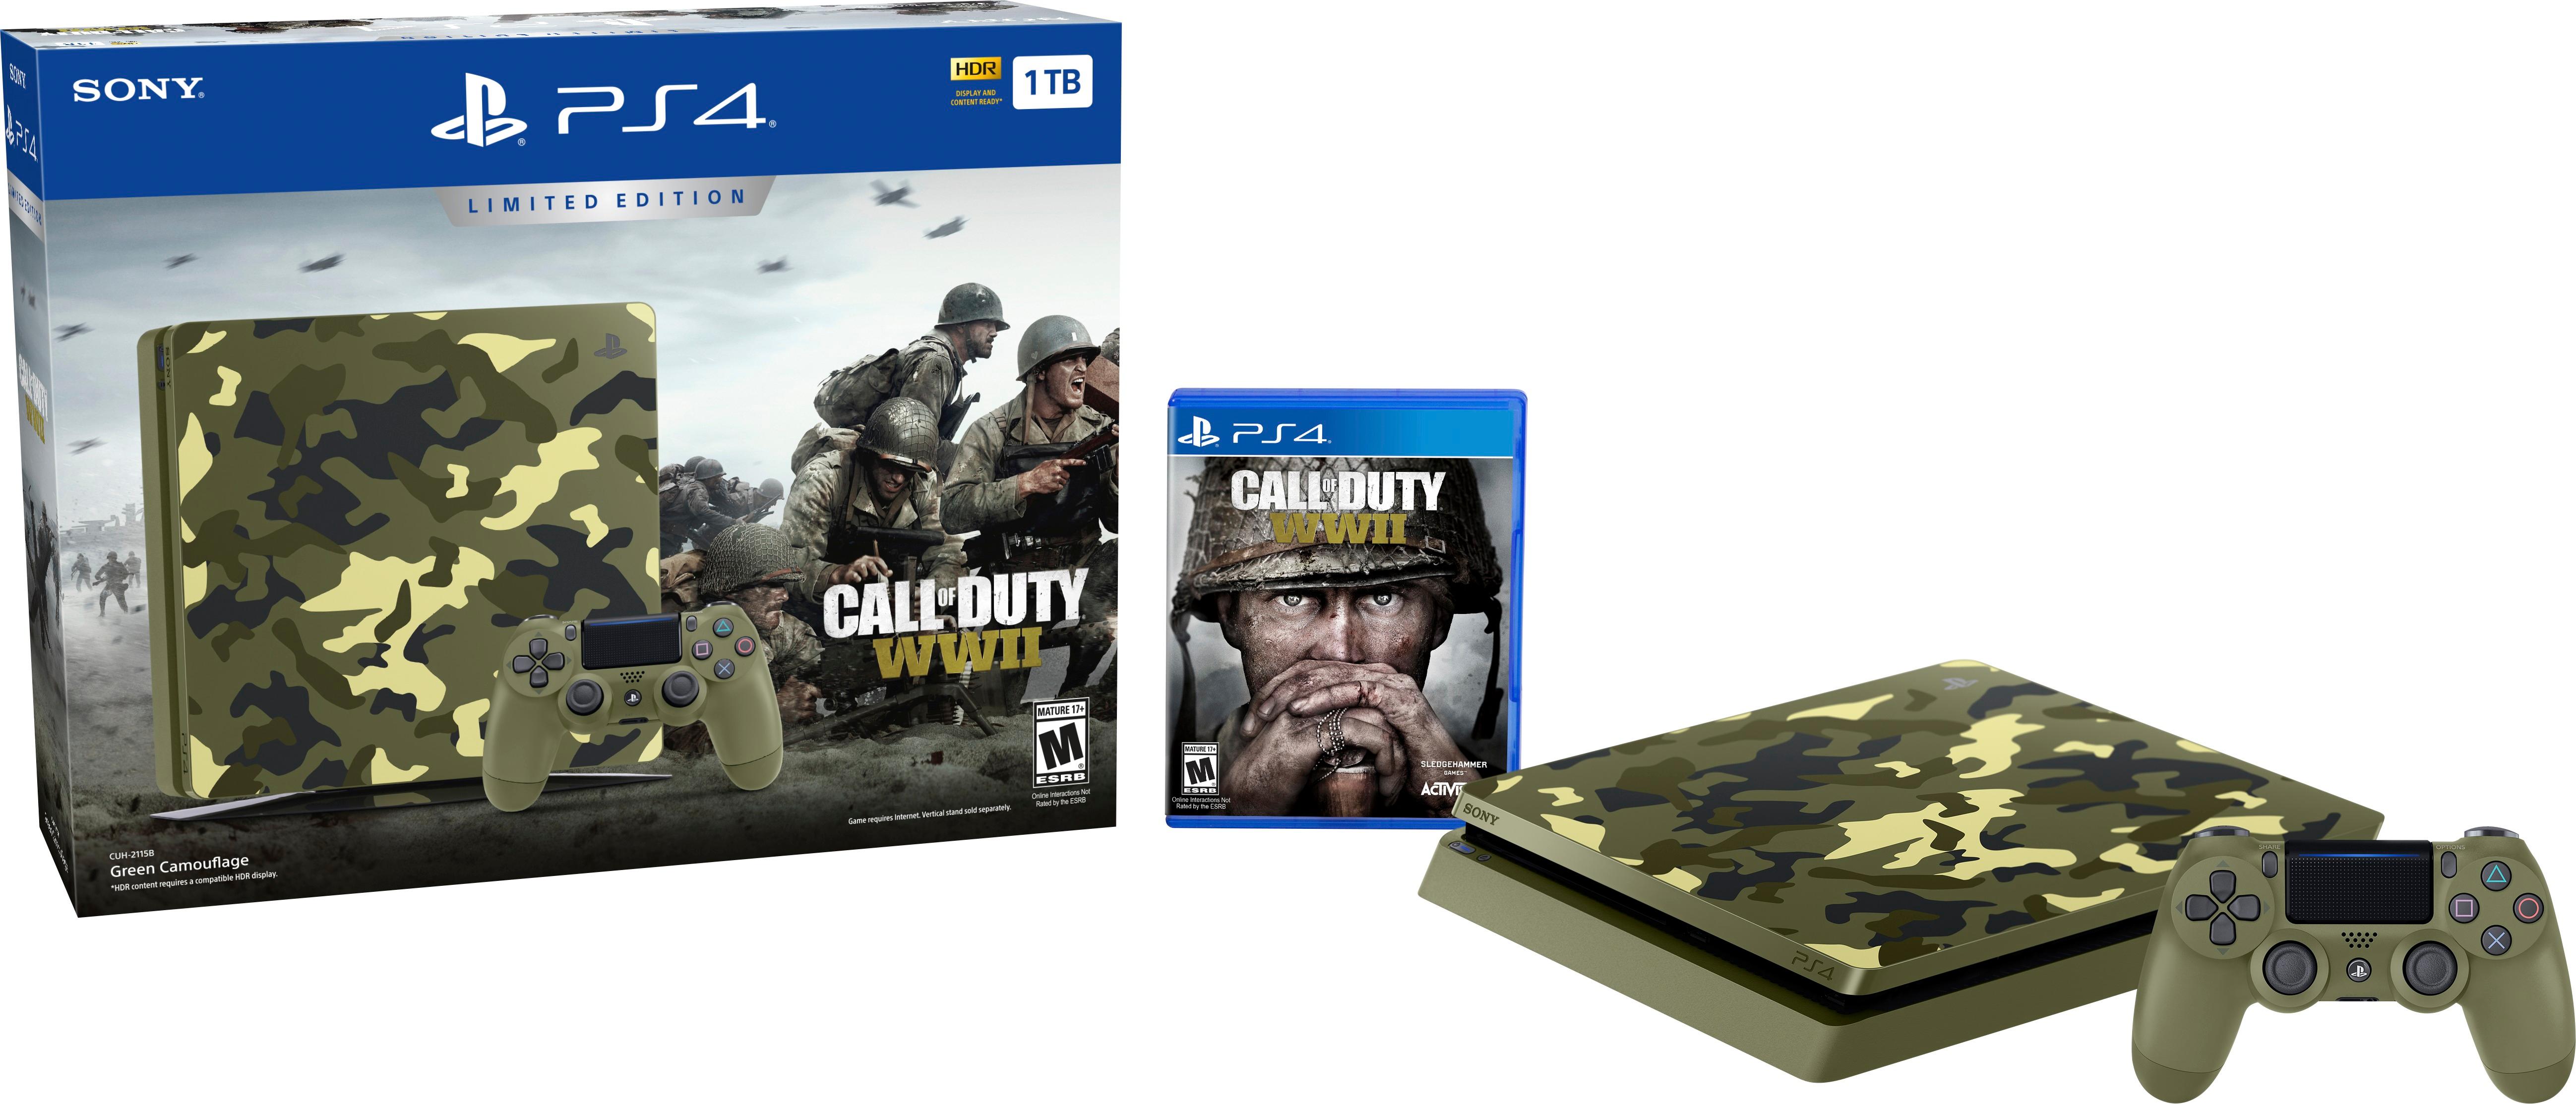 Best Buy: Sony PlayStation 4 1TB Limited Edition Call of Duty 